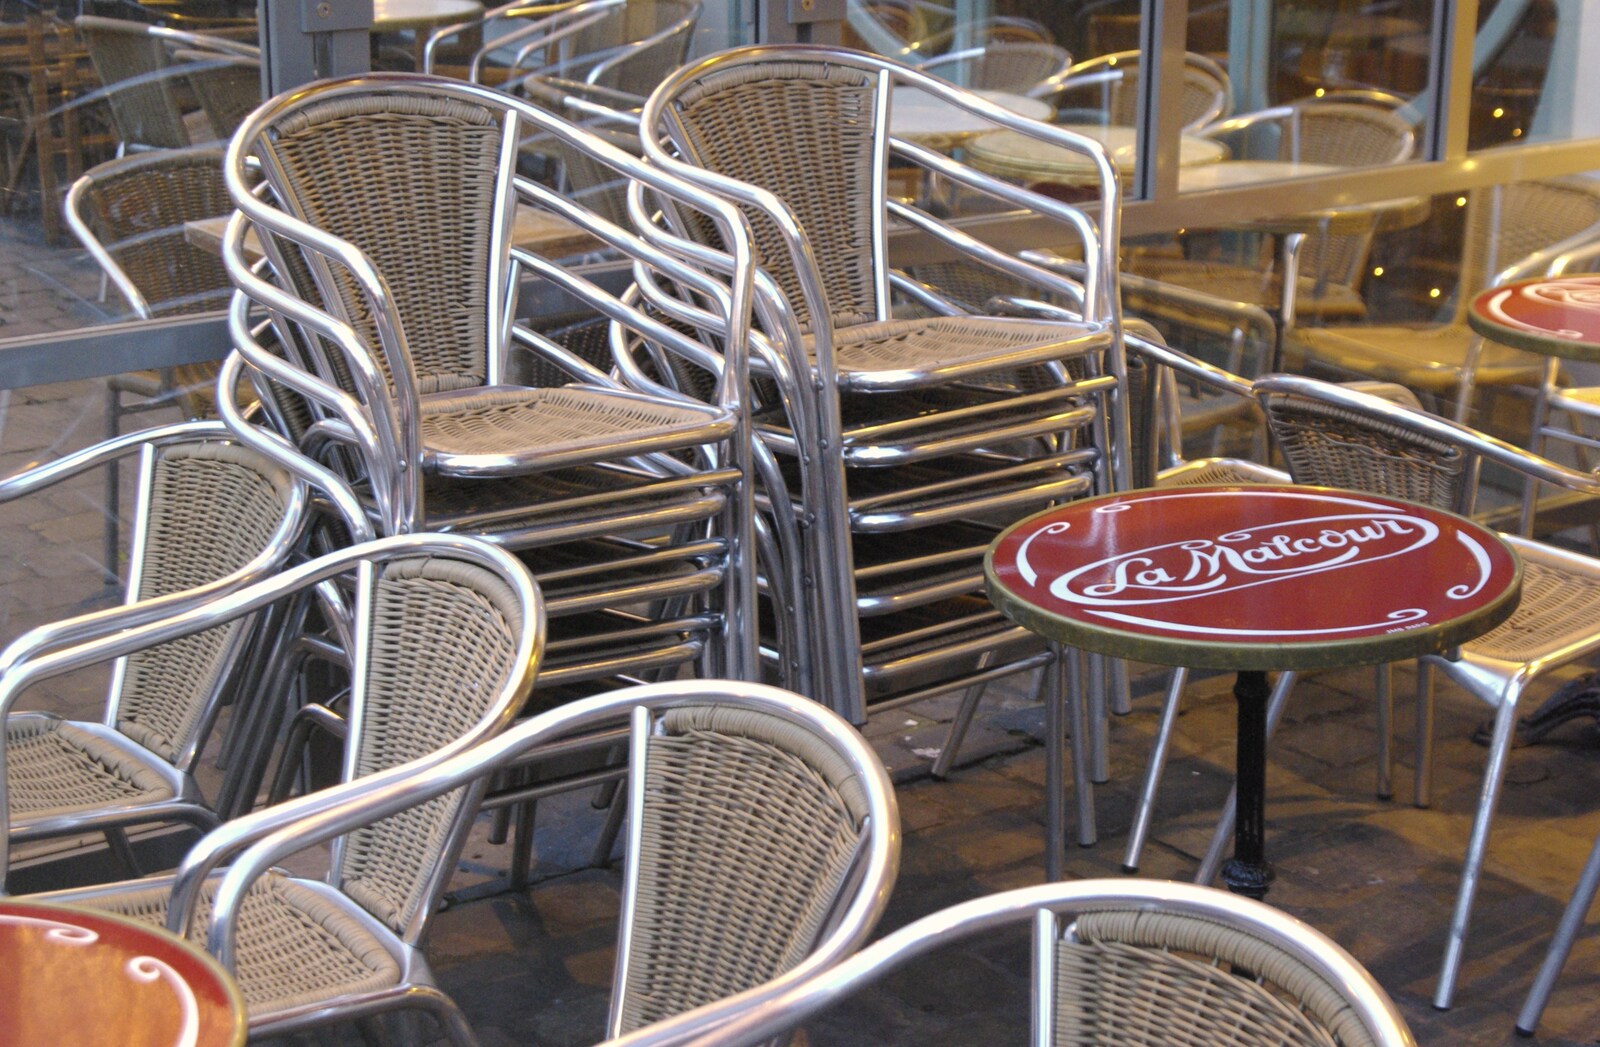 Stacked café chairs from The Christmas Markets of Brussels, Belgium - 1st January 2007